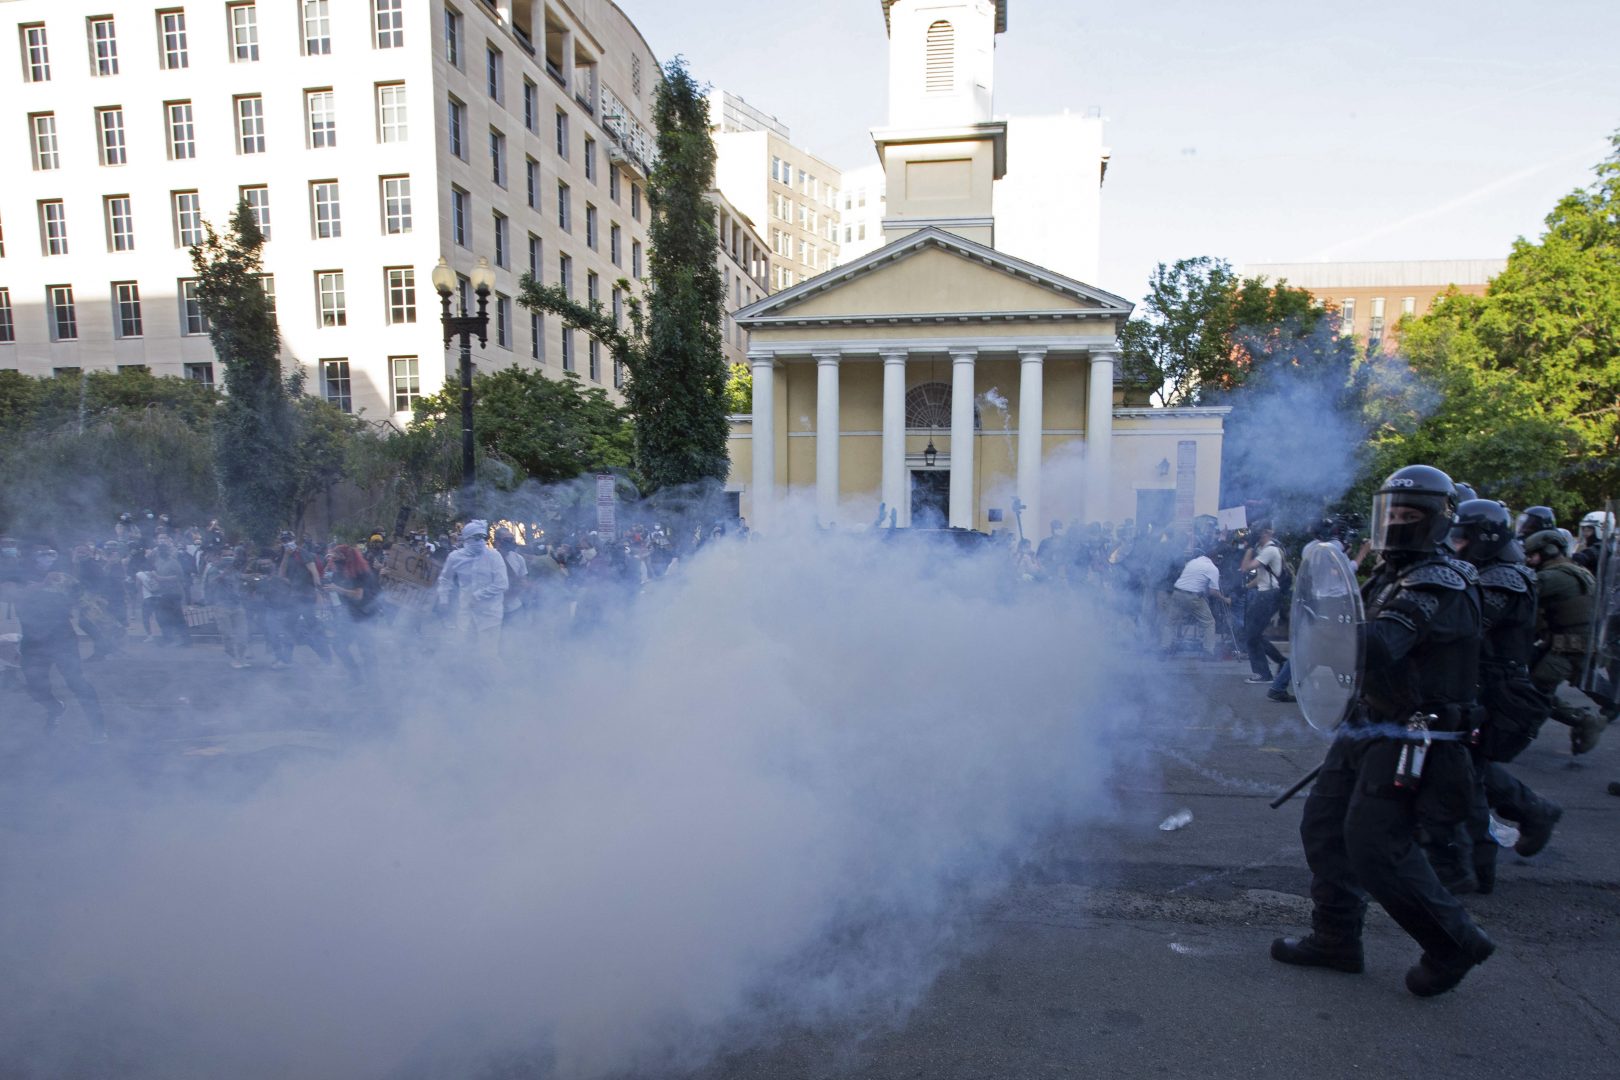 TOPSHOT - Police officers wearing riot gear push back demonstrators shooting tear gas next to St. John's Episcopal Church  outside of the White House, June 1, 2020 in Washington D.C., during a protest over the death of George Floyd. - President Trump visited the church while demonstrators where protesting. With the Trump administration branding instigators of six nights of rioting as domestic terrorists, there were more confrontations between protestors and police and fresh outbreaks of looting. Local US leaders appealed to citizens to give constructive outlet to their rage over the death of an unarmed black man in Minneapolis, while night-time curfews were imposed in cities including Washington, Los Angeles and Houston. (Photo by Jose Luis Magana / AFP) (Photo by JOSE LUIS MAGANA/AFP via Getty Images)